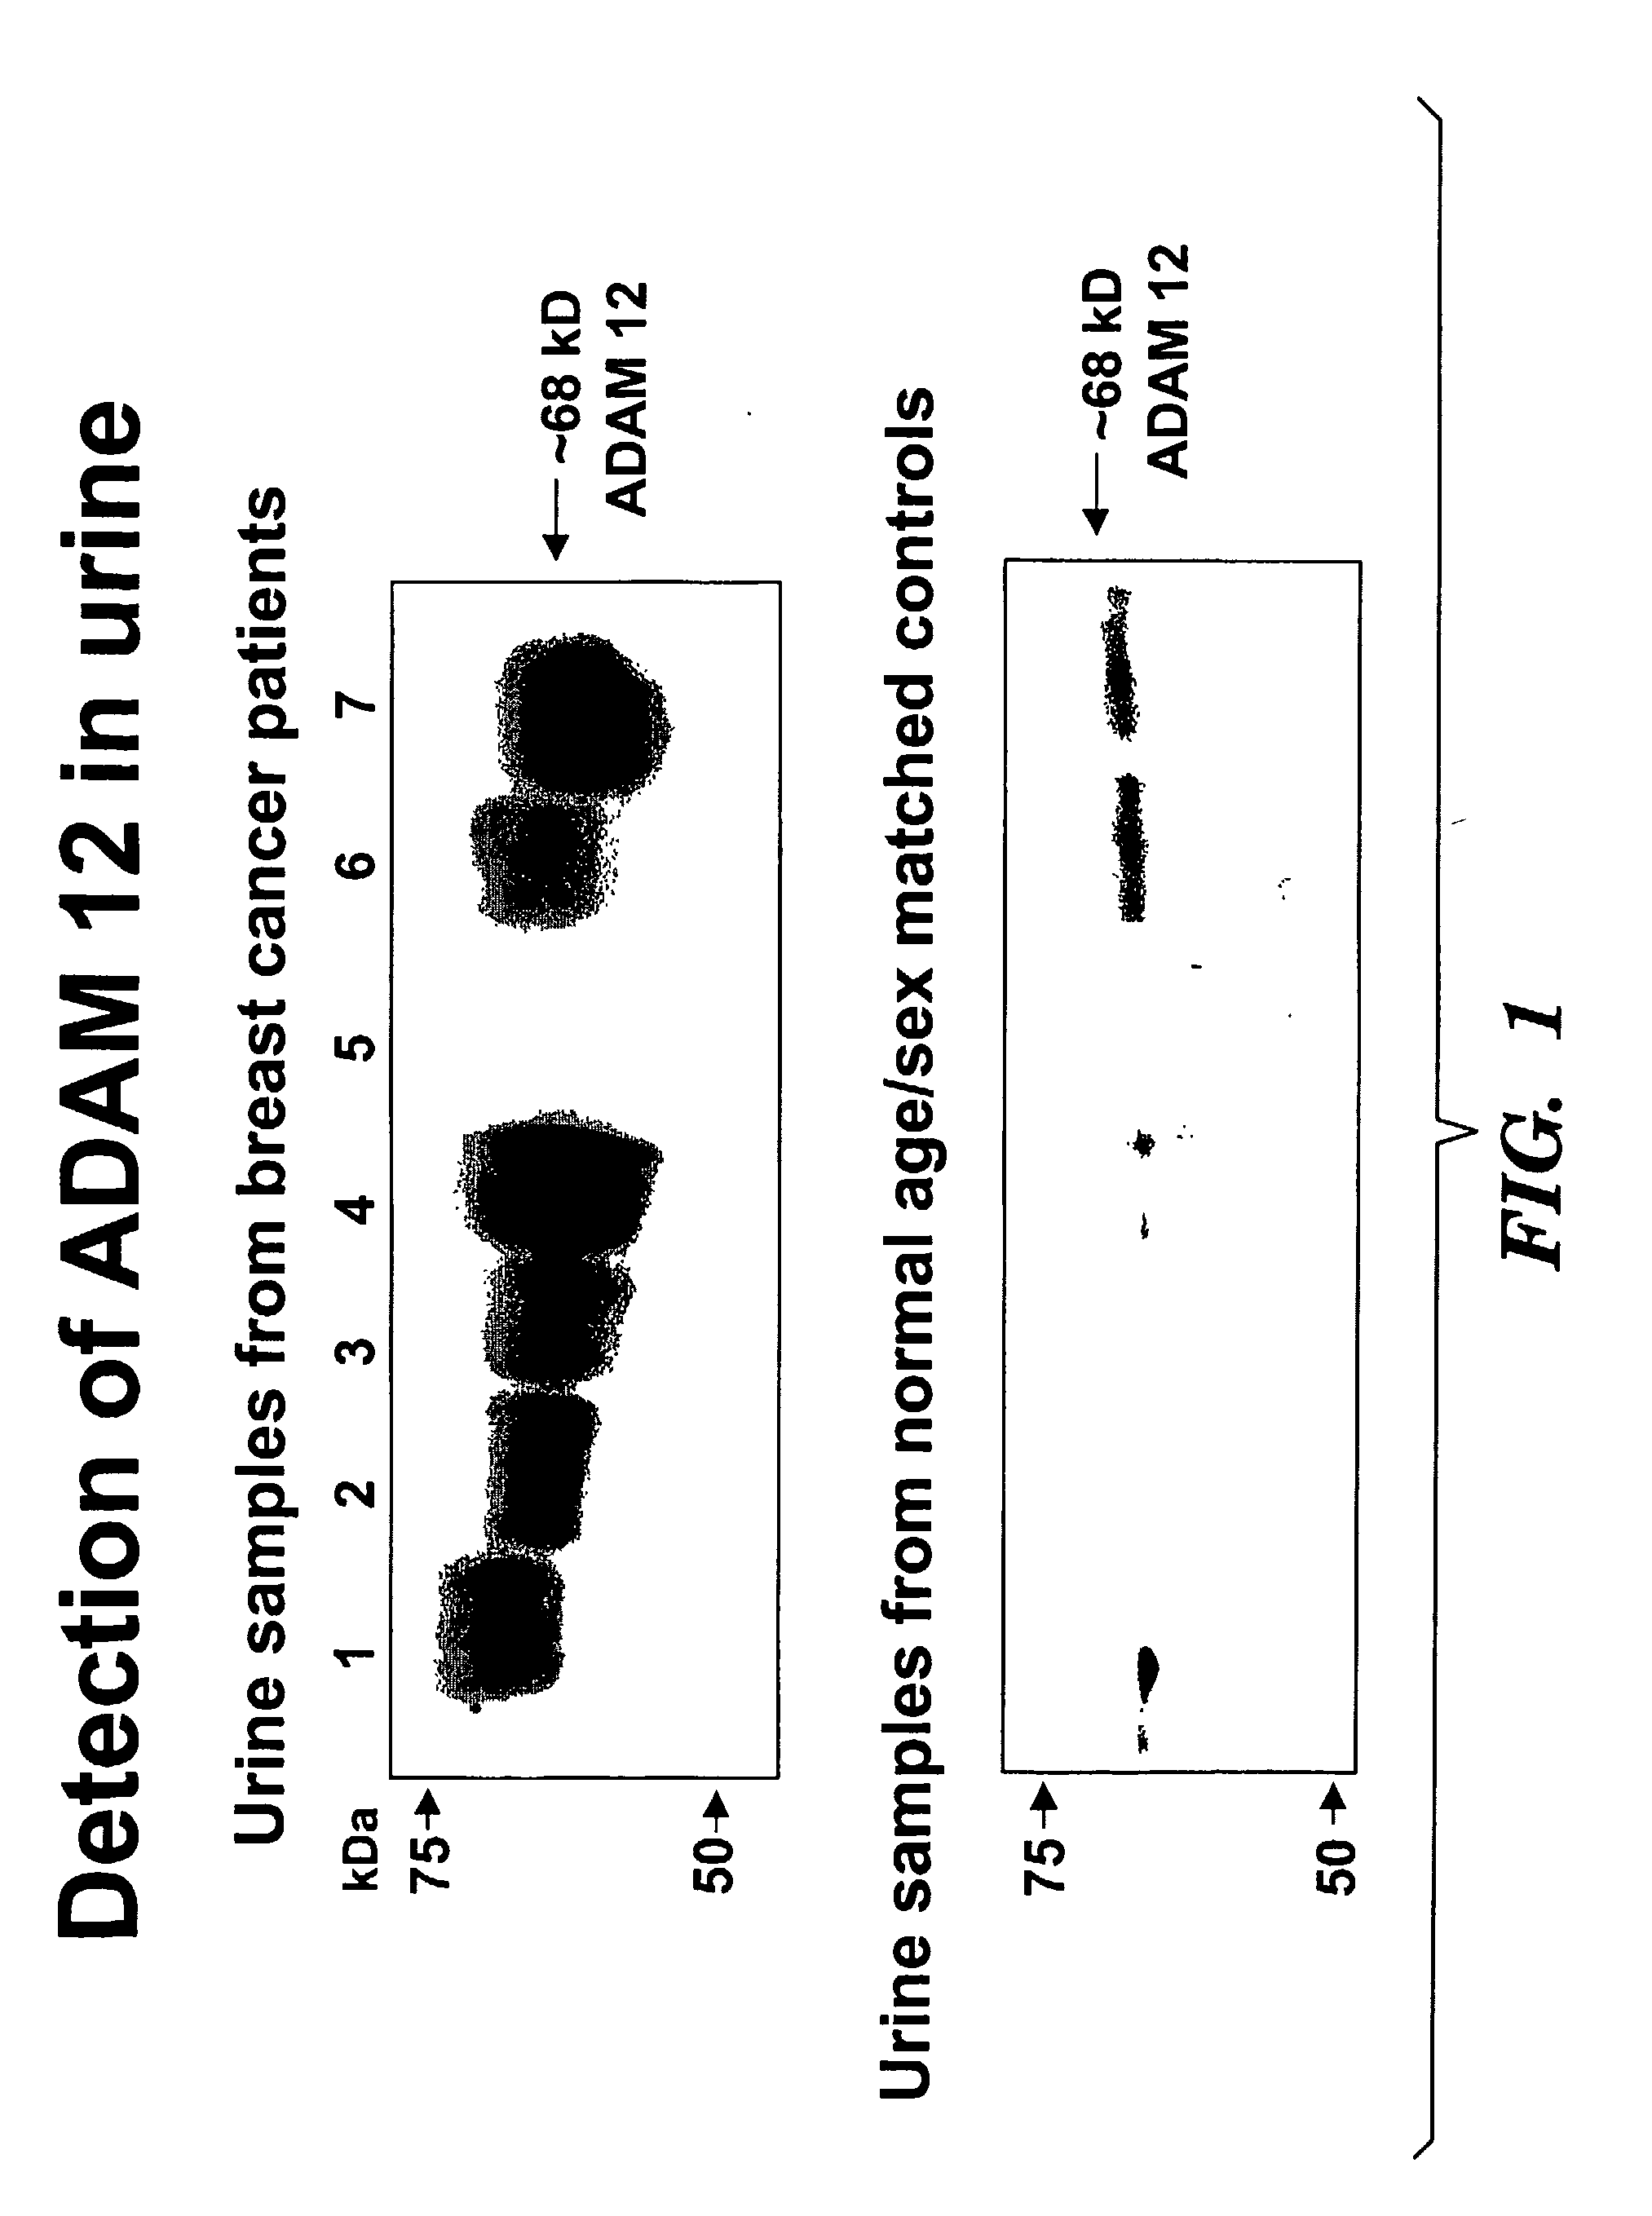 Methods for diagnosis and prognosis of cancers of epithelial origin